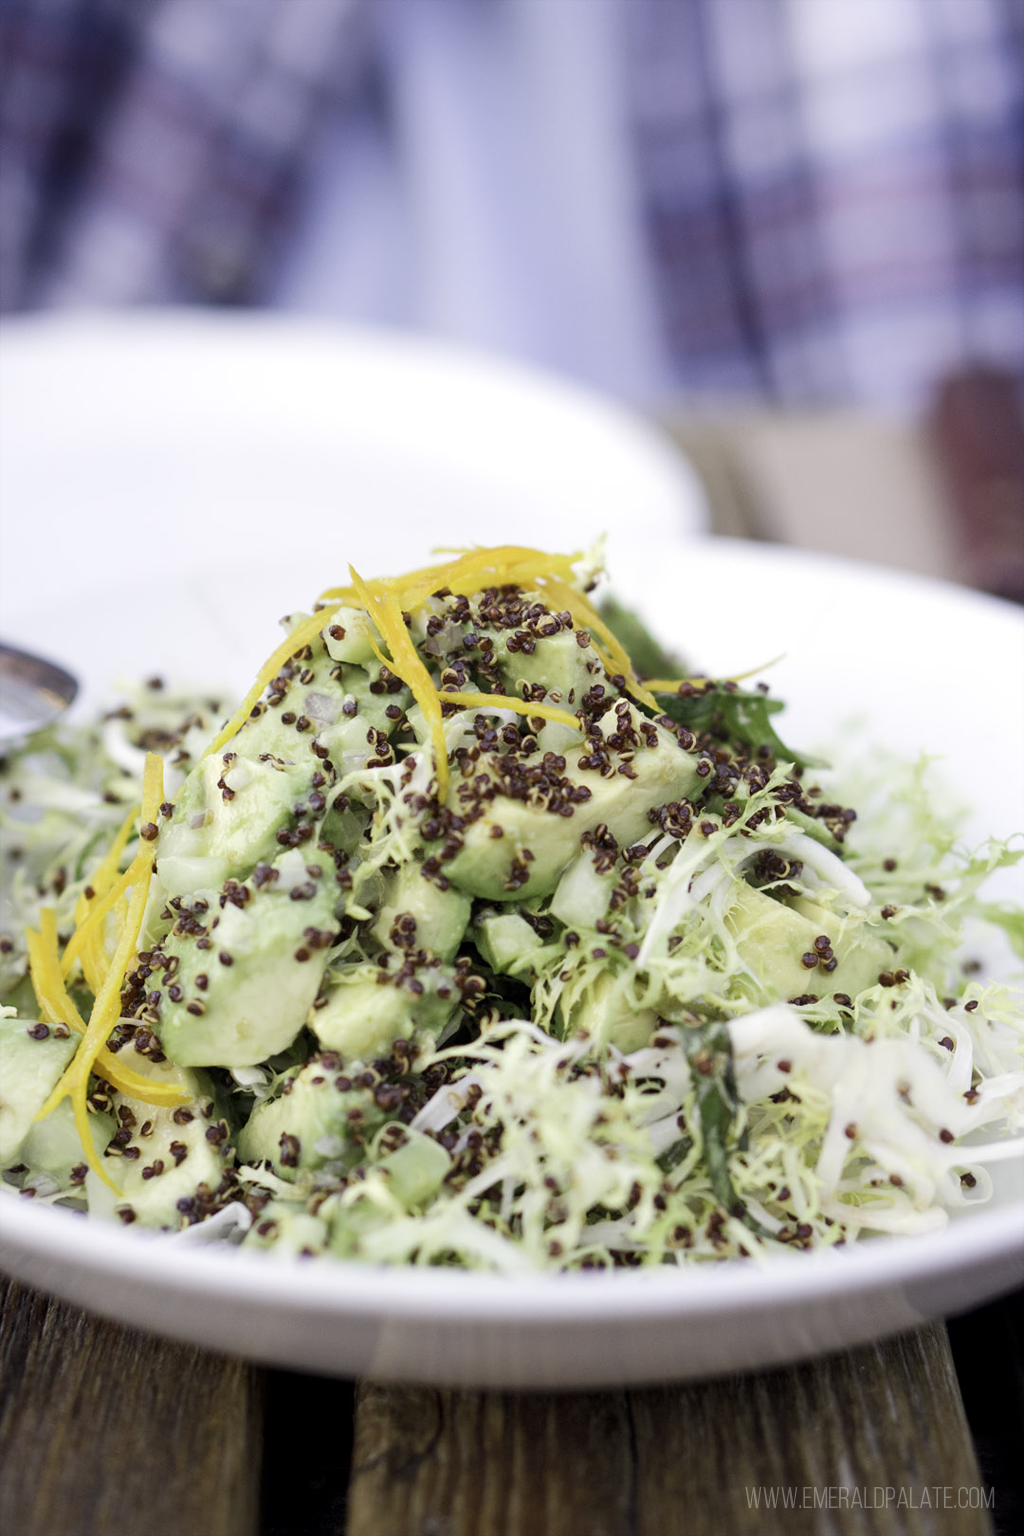 frisee salad with puffed quinoa, avocado, cucumbers, and orange zest